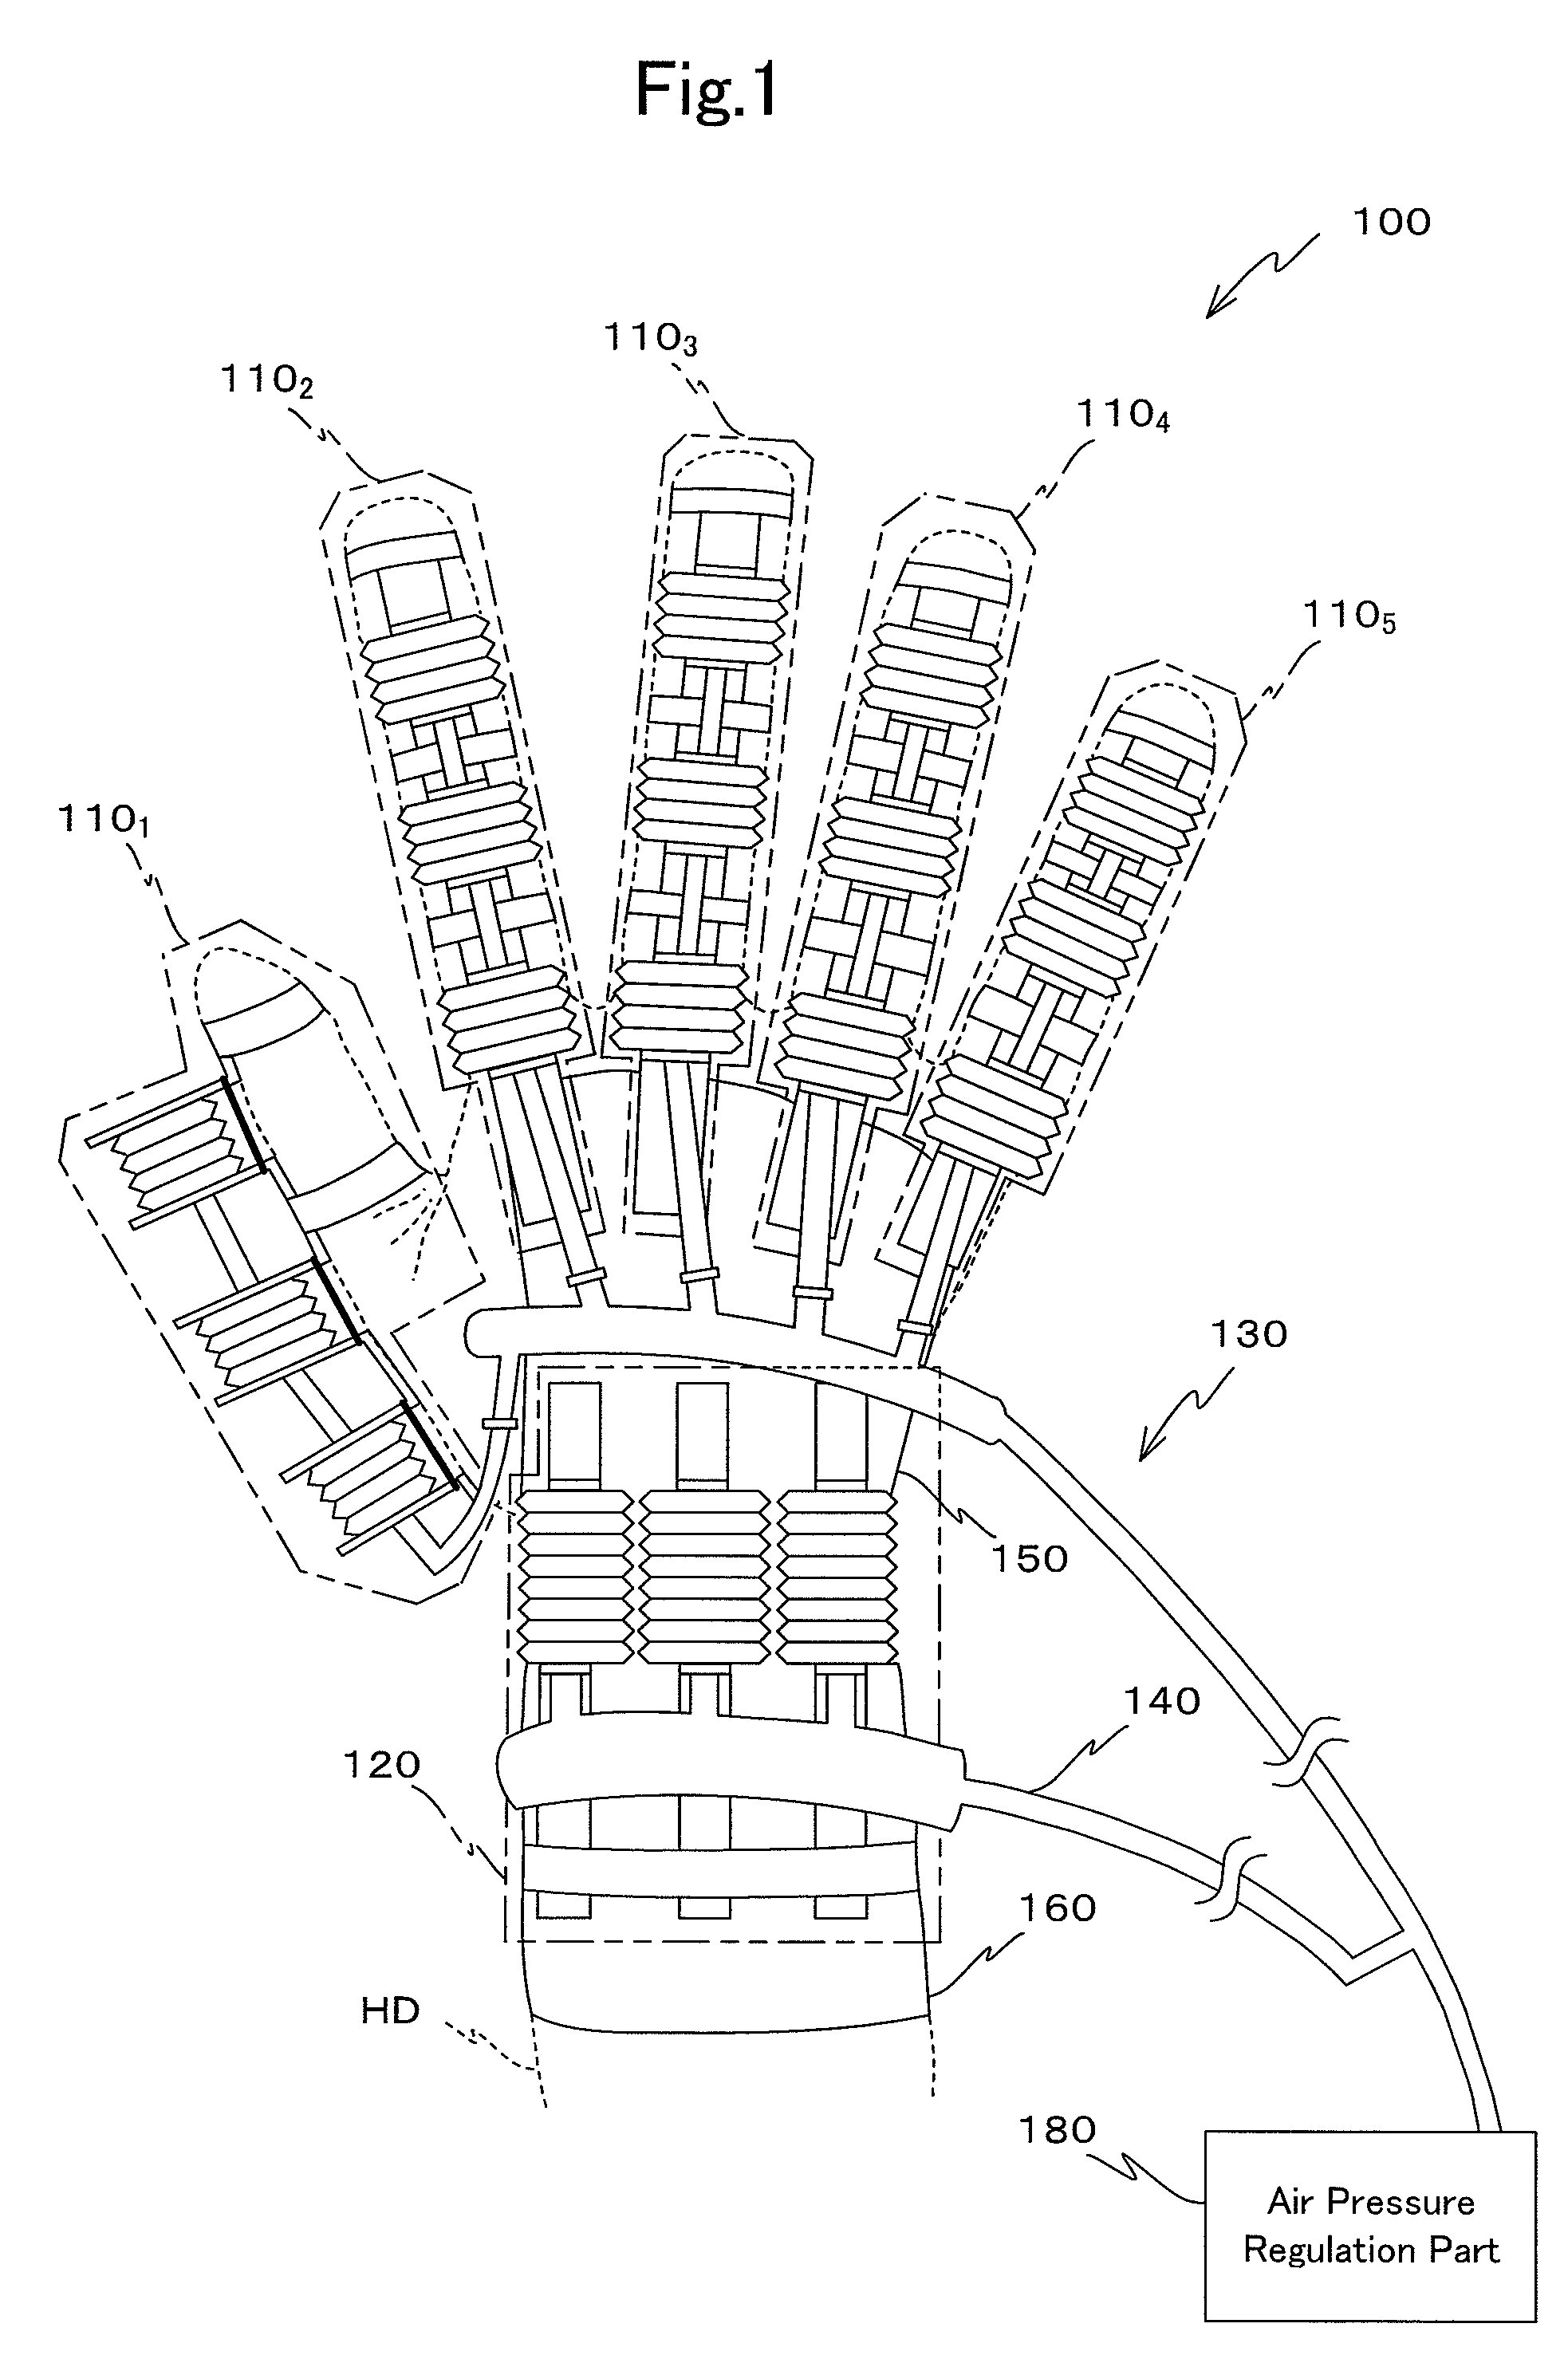 Joint motion facilitation device